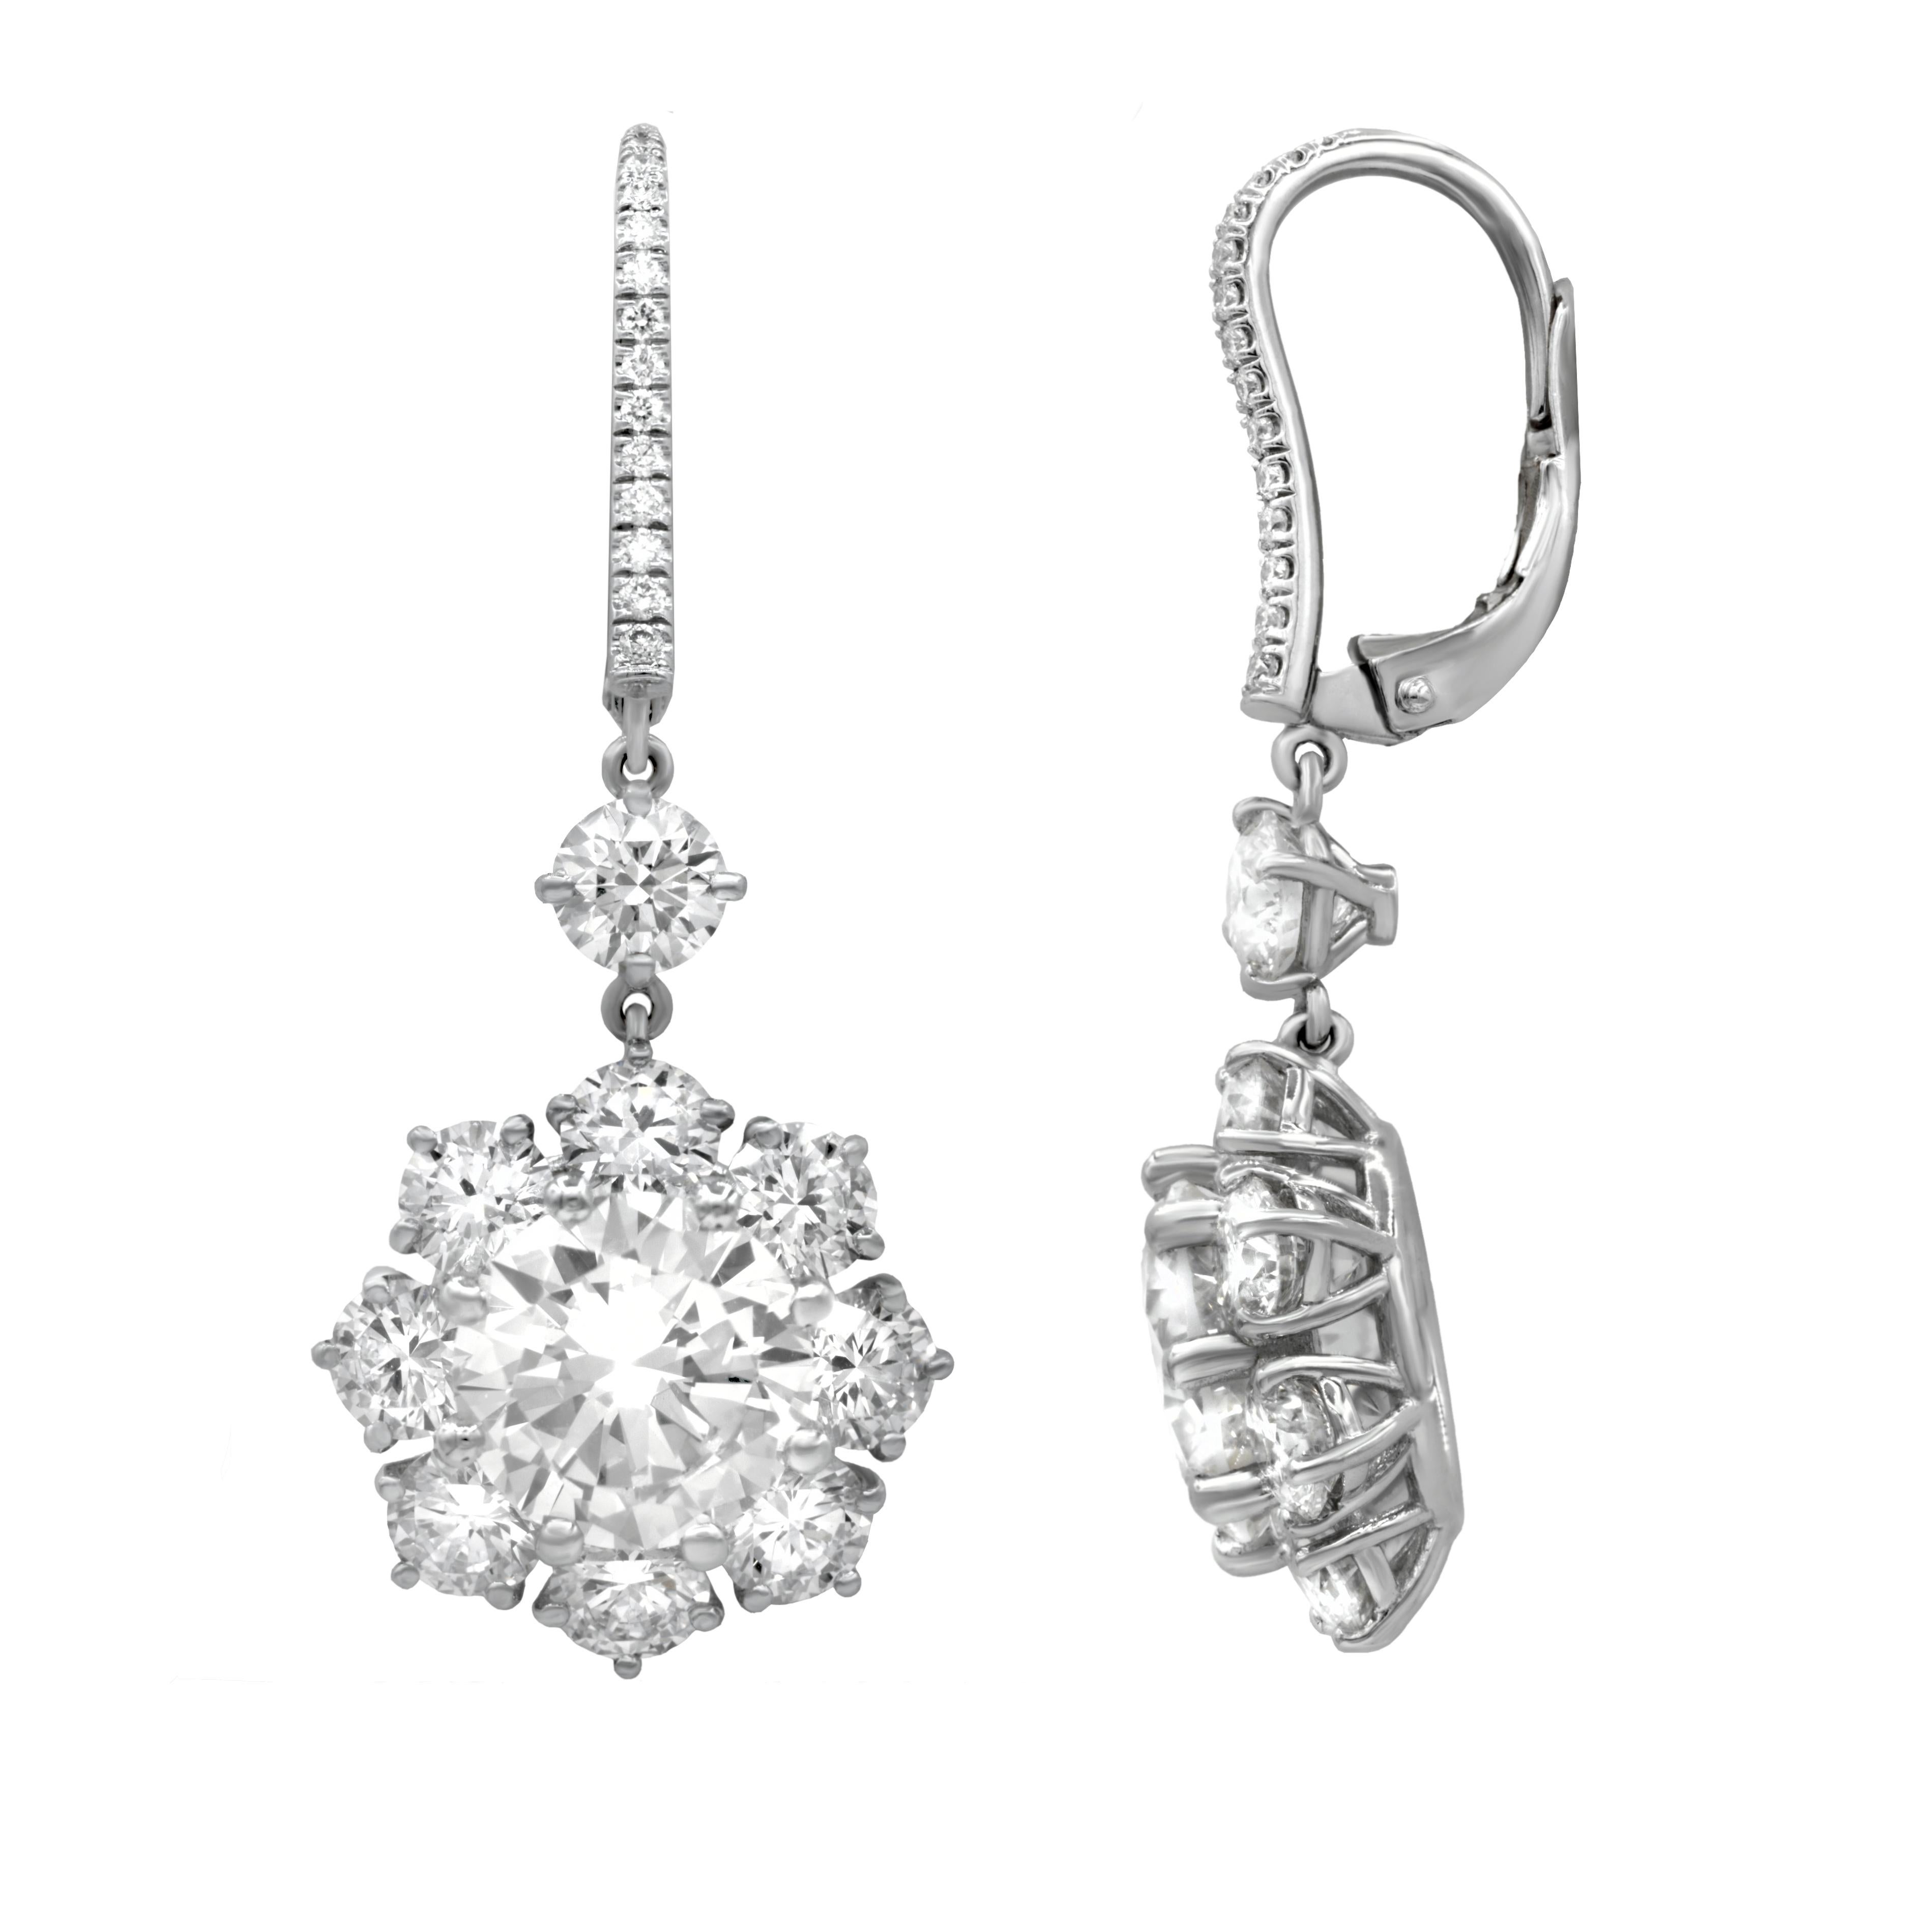 Platinum diamond dl drop earrings with center diamonds 3.28ct+3.39ct center GIA certified  k-vs2 and additional 5.00 of large round diamonds total weight 12.17cts diamonds 

